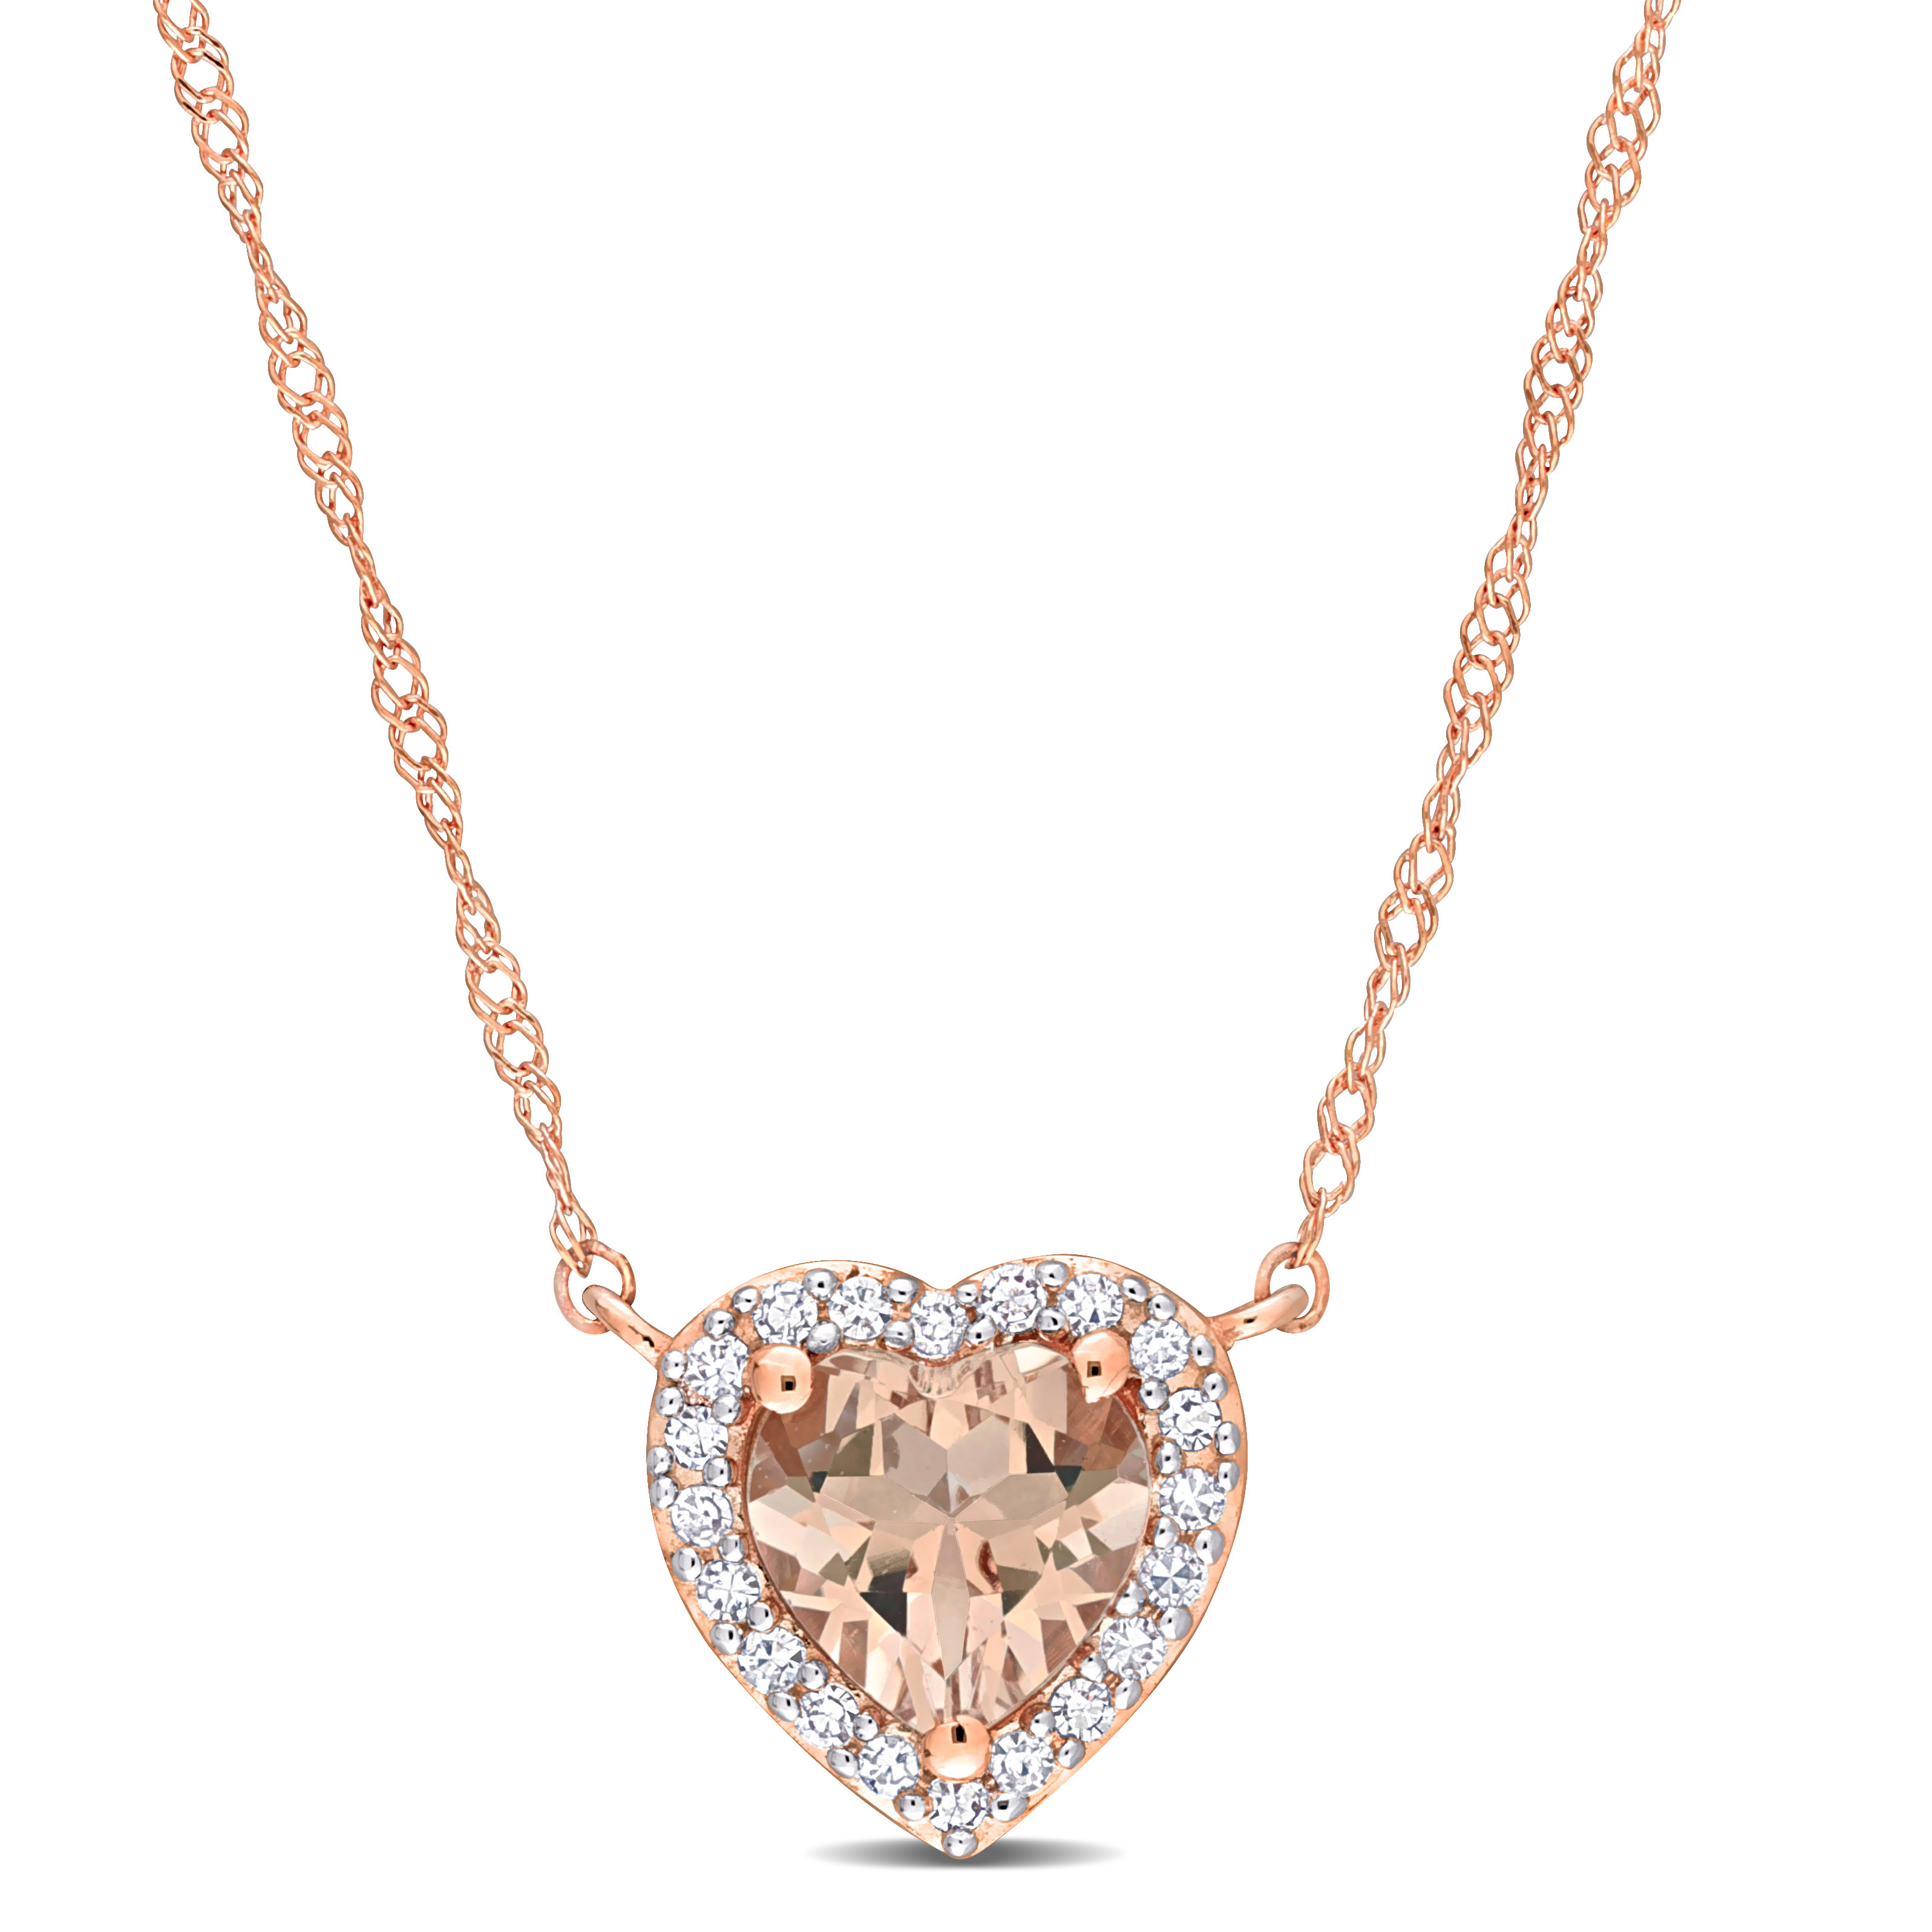 5/8 CT TGW Heart-Cut Morganite and 1/10CT TDW Diamond Halo Necklace in 14k Rose Gold